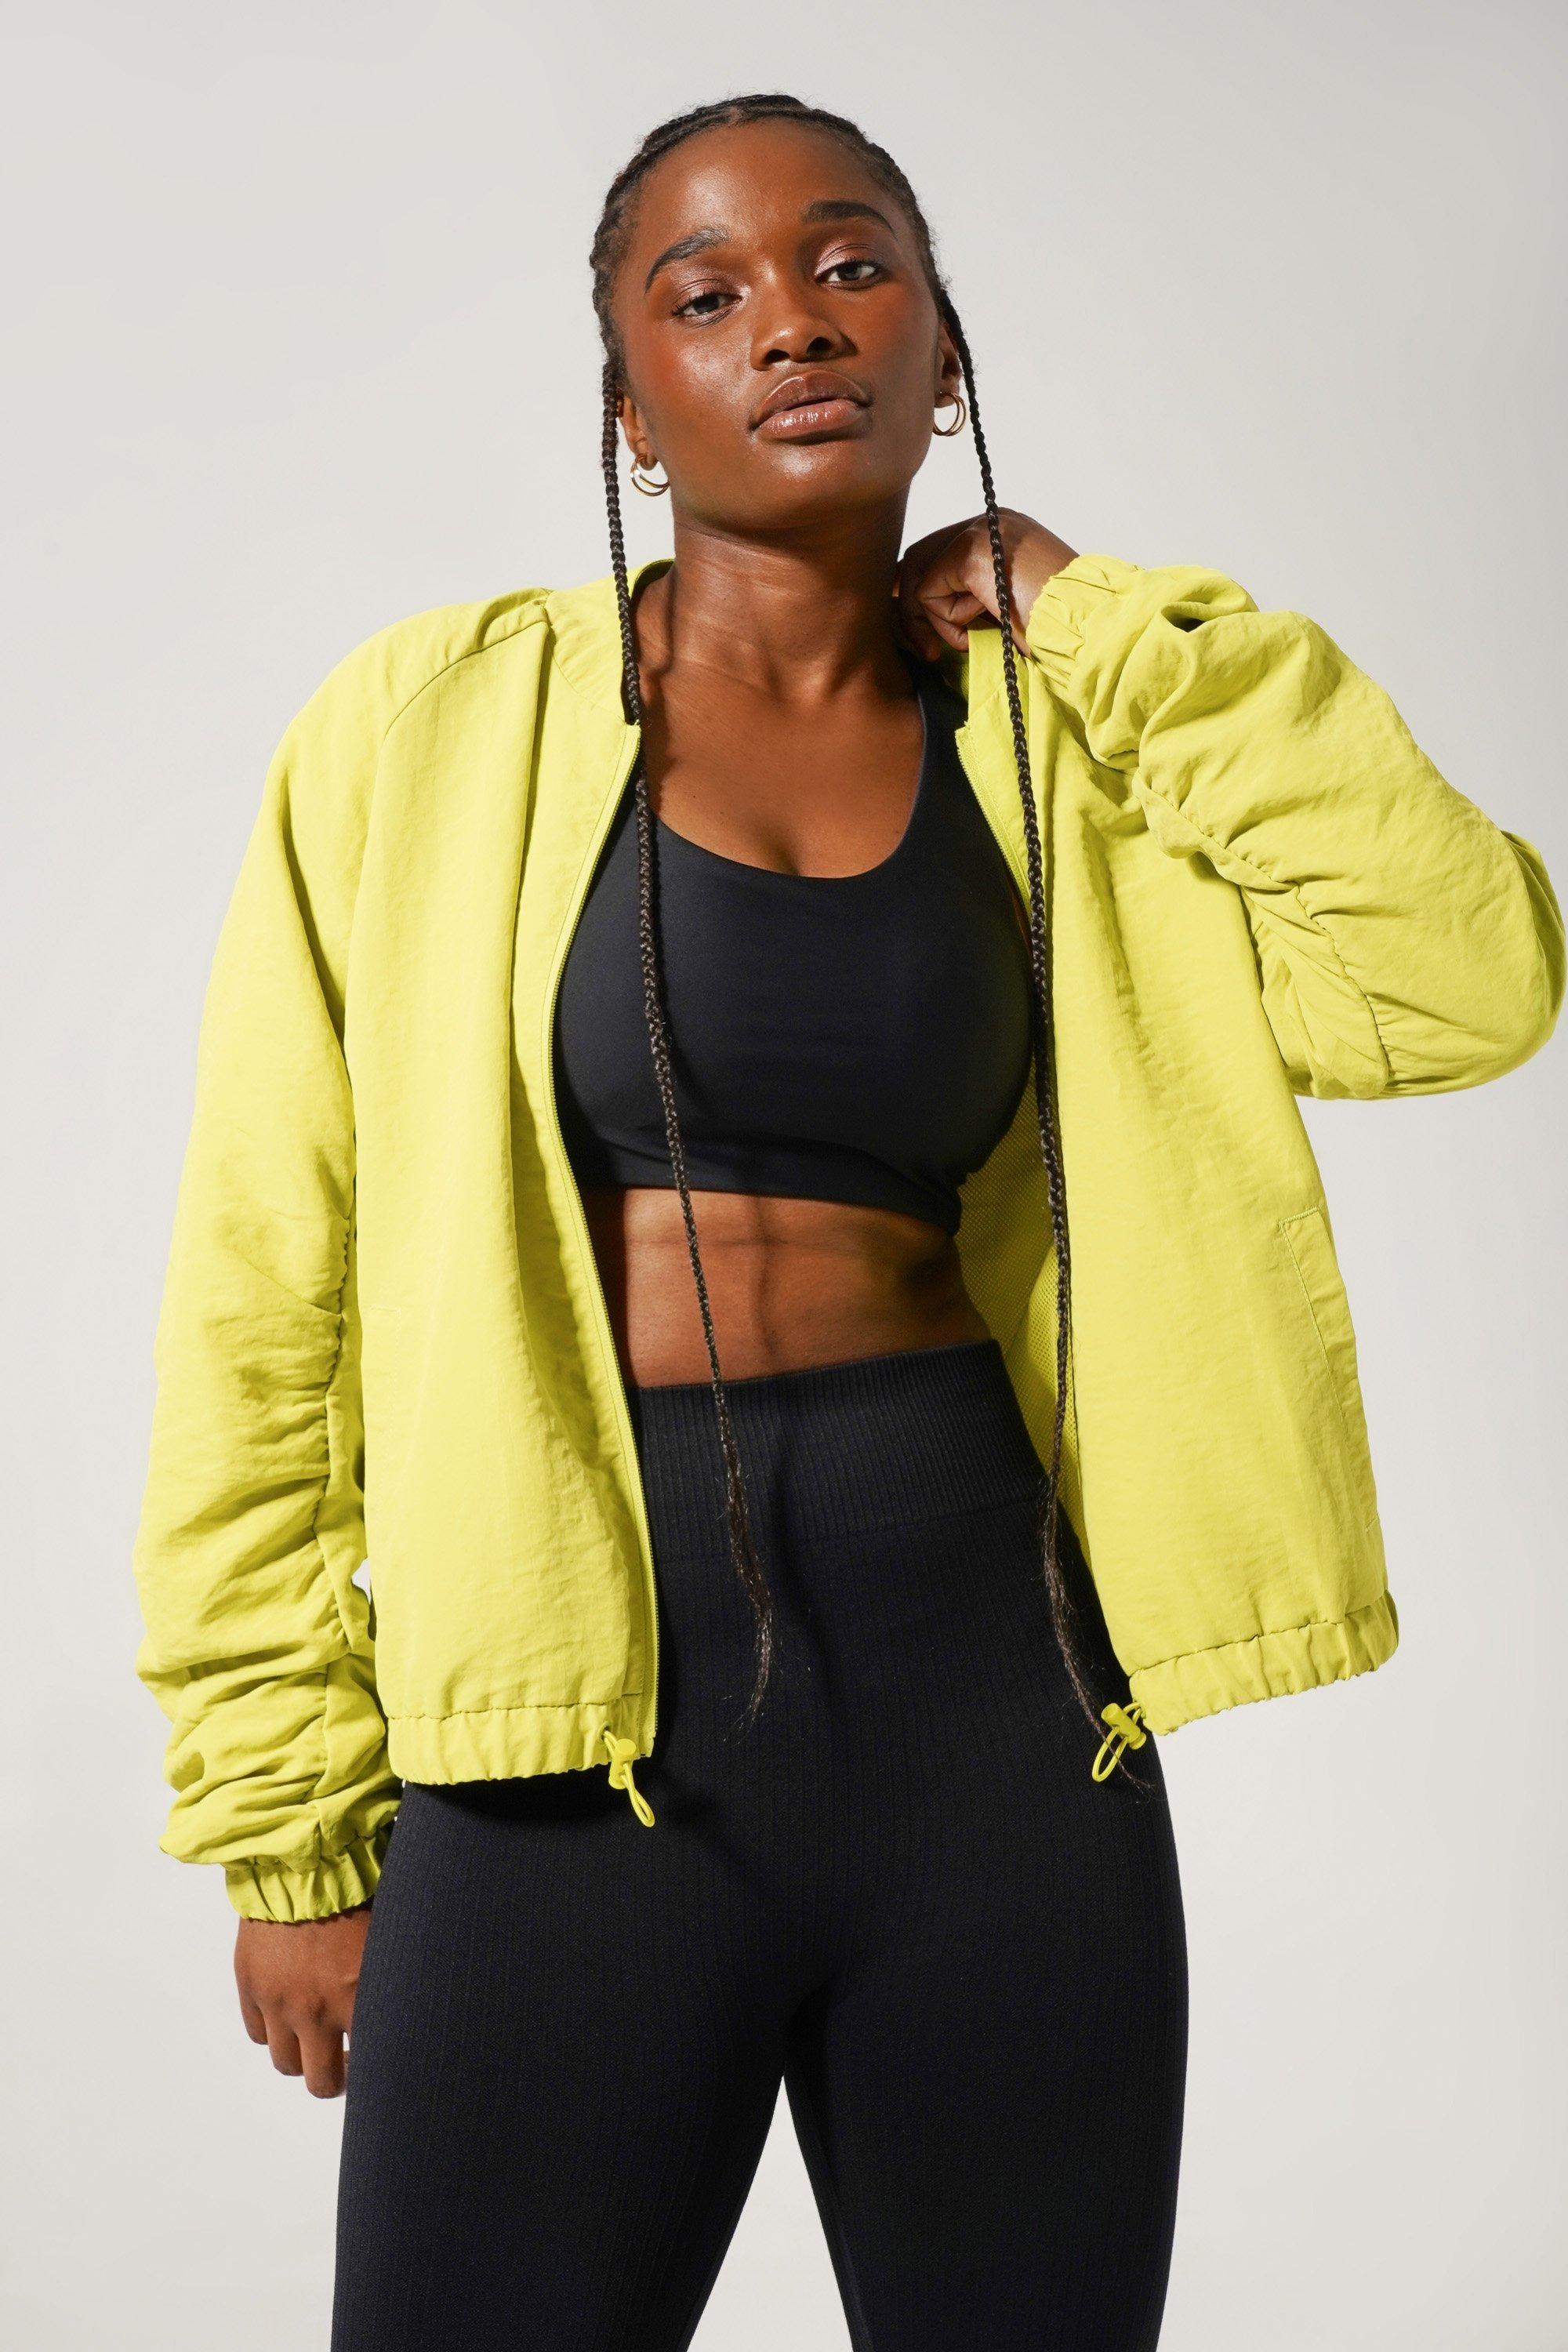 Women's Matching Activewear Sets - FOREVER 21